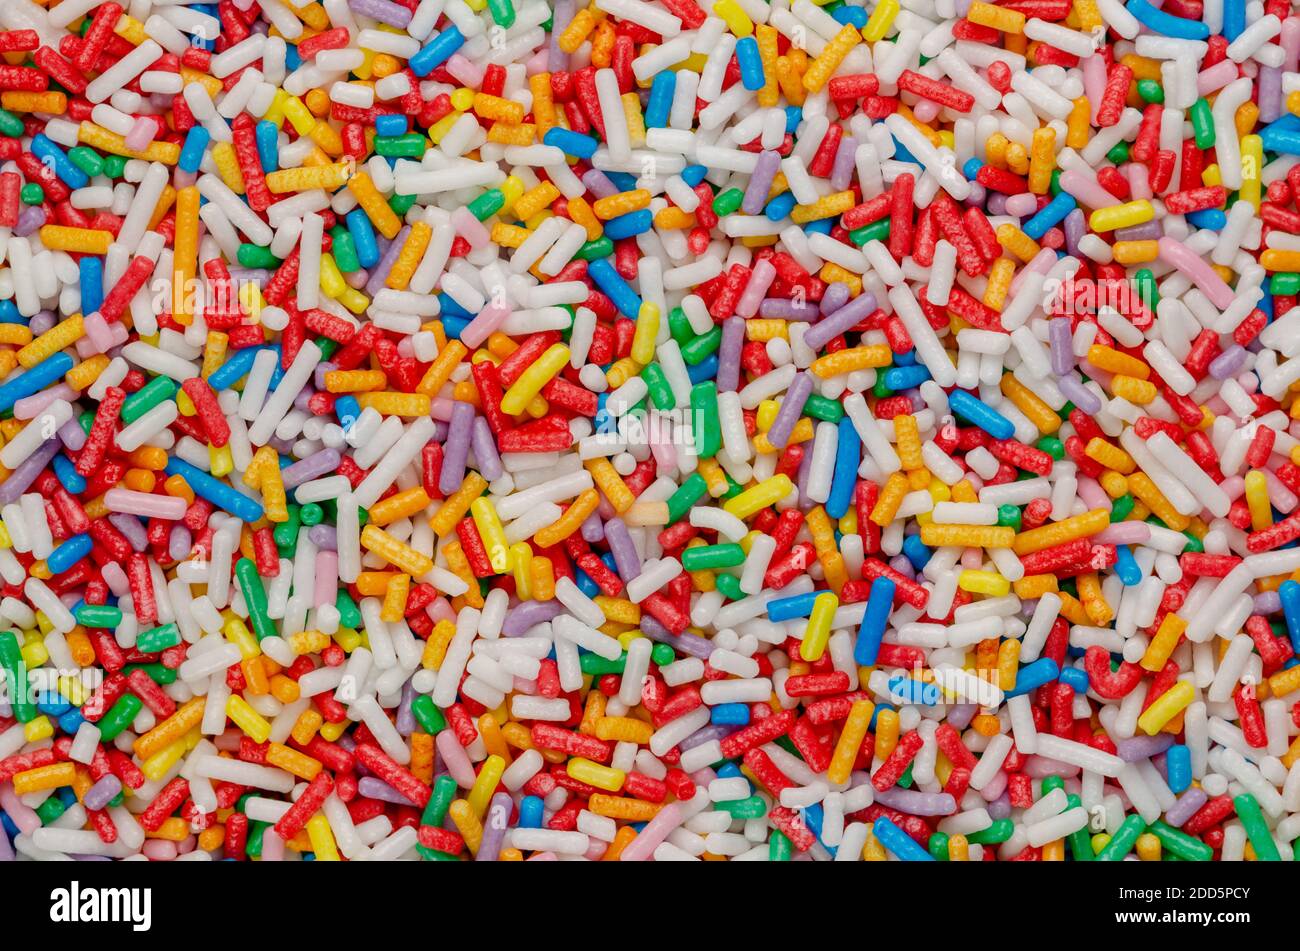 Rainbow sprinkles, background and surface. Rod-shaped colorful sugar sprinkles. Tiny candies in a variety of colors, used as decoration or topping. Stock Photo